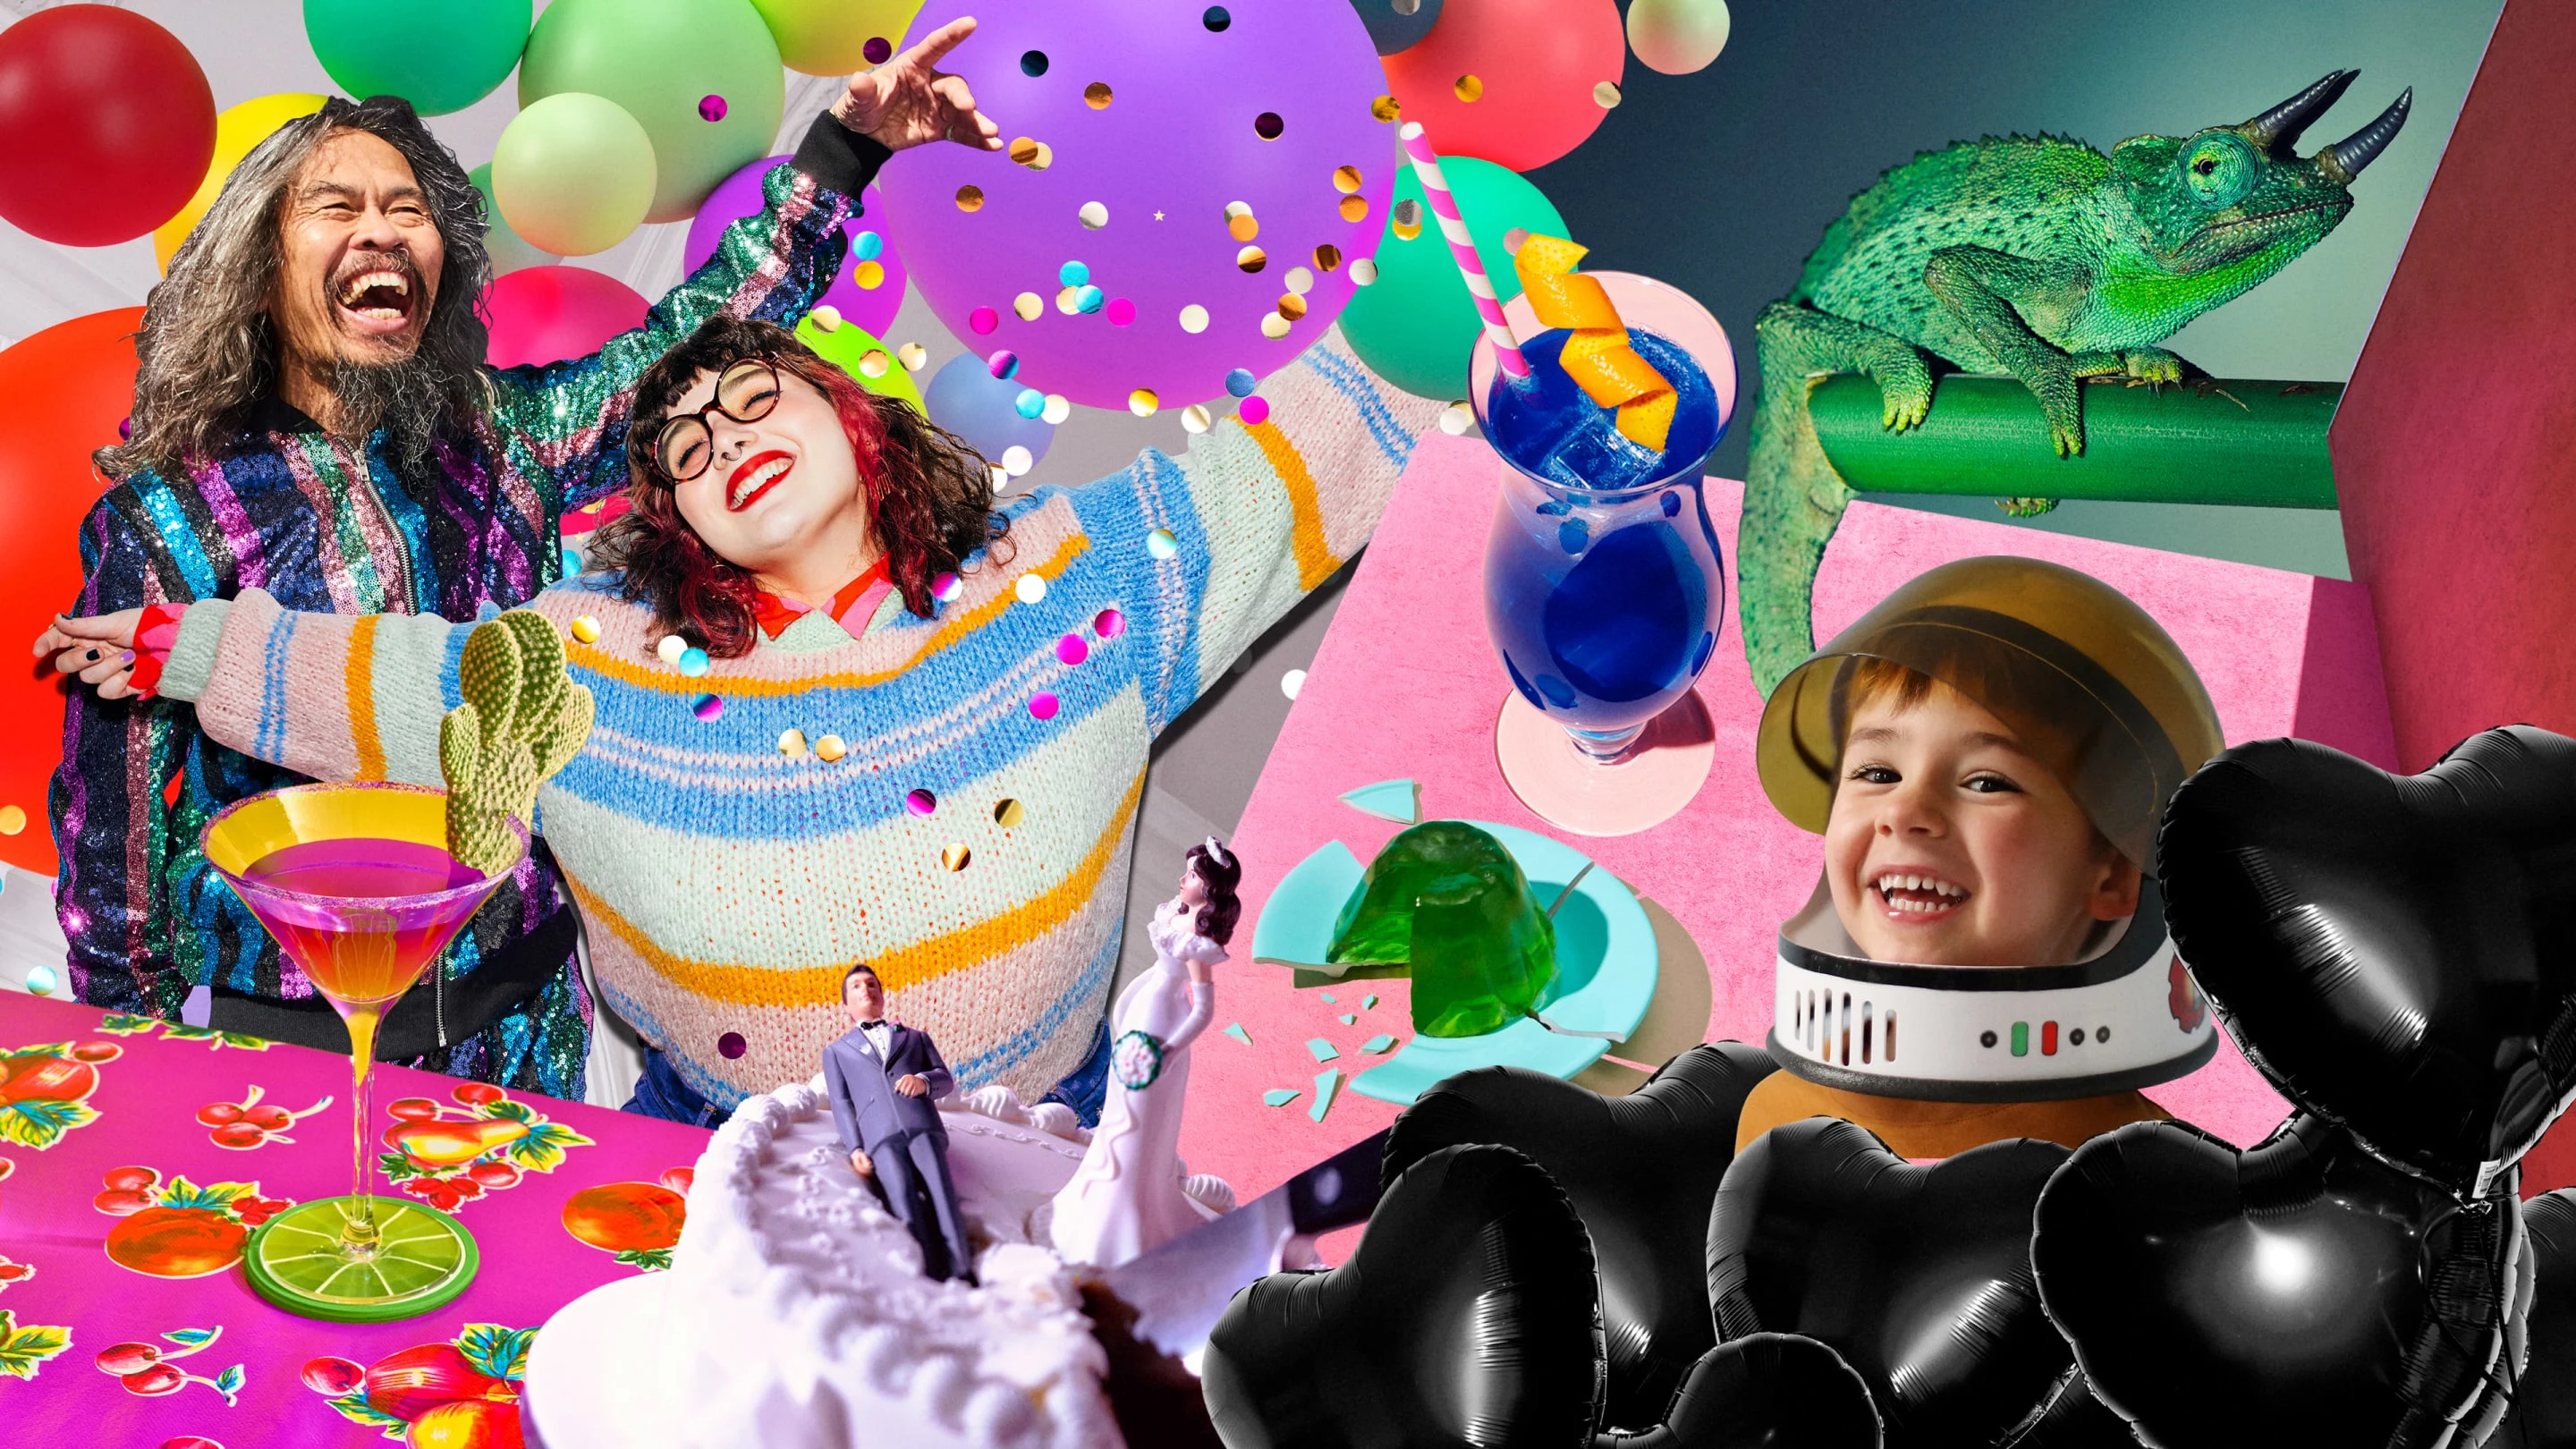 Collage of party themes. An older, smiling East Asian man, holds up a hand. A smiling white woman is in the centre, holding out her arms. A white child, wearing an astronaut helmet is beside black, heart-shaped balloons on the right.An iguana is on a green branch on the top right. A martini glass is on a multi-coloured tablecloth, beside a cake with male and female figurines on top. Balloons of different bright colours are on the top left.
